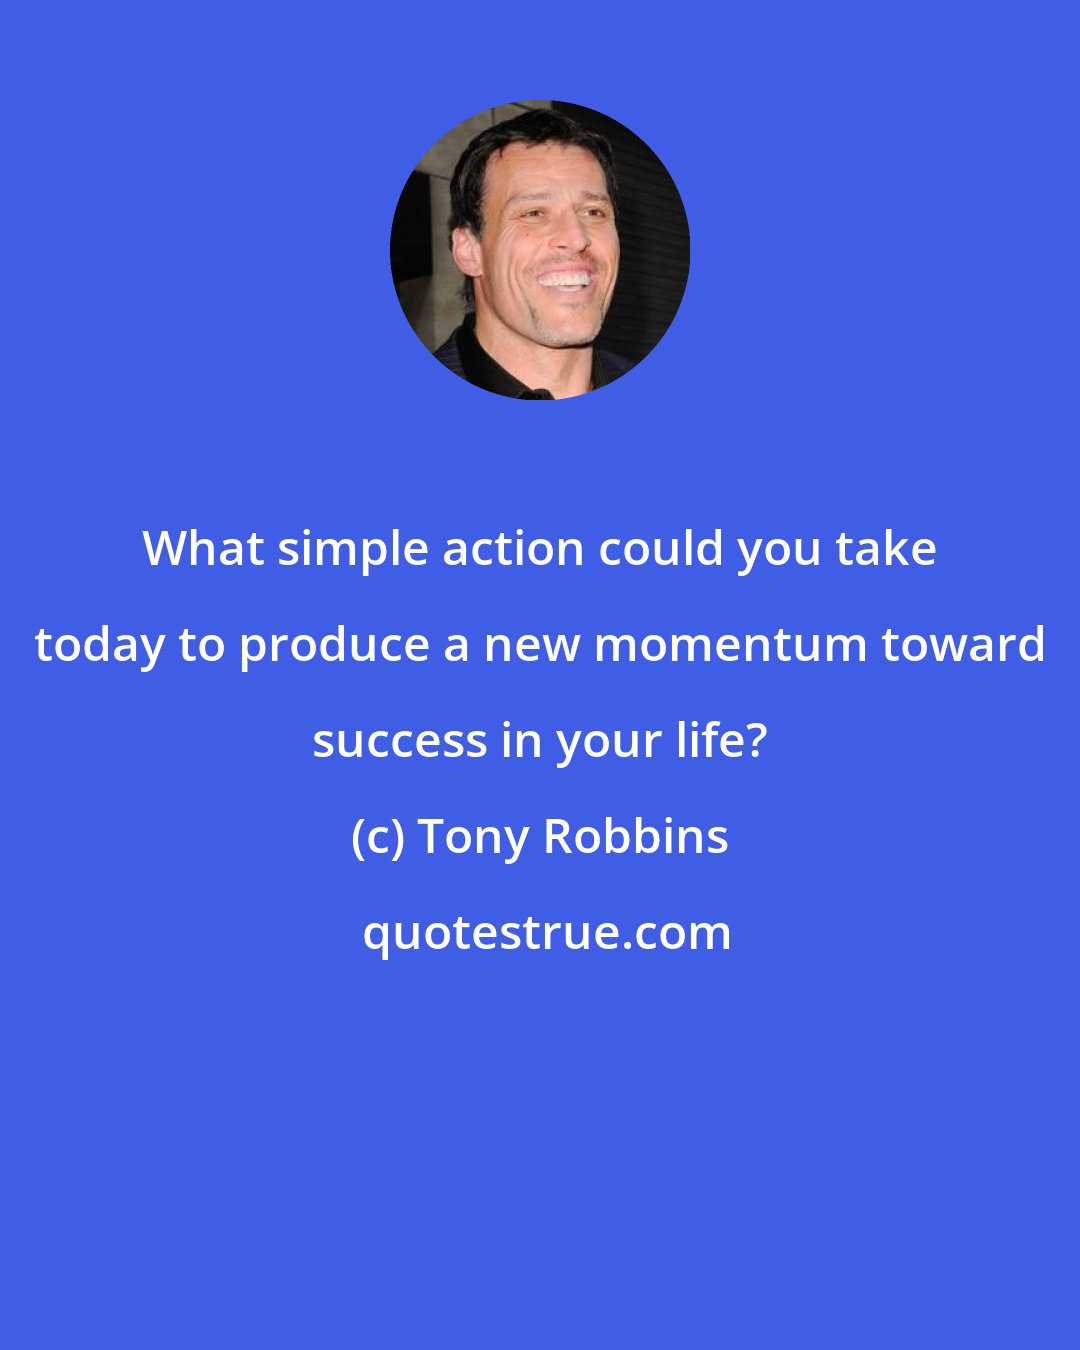 Tony Robbins: What simple action could you take today to produce a new momentum toward success in your life?